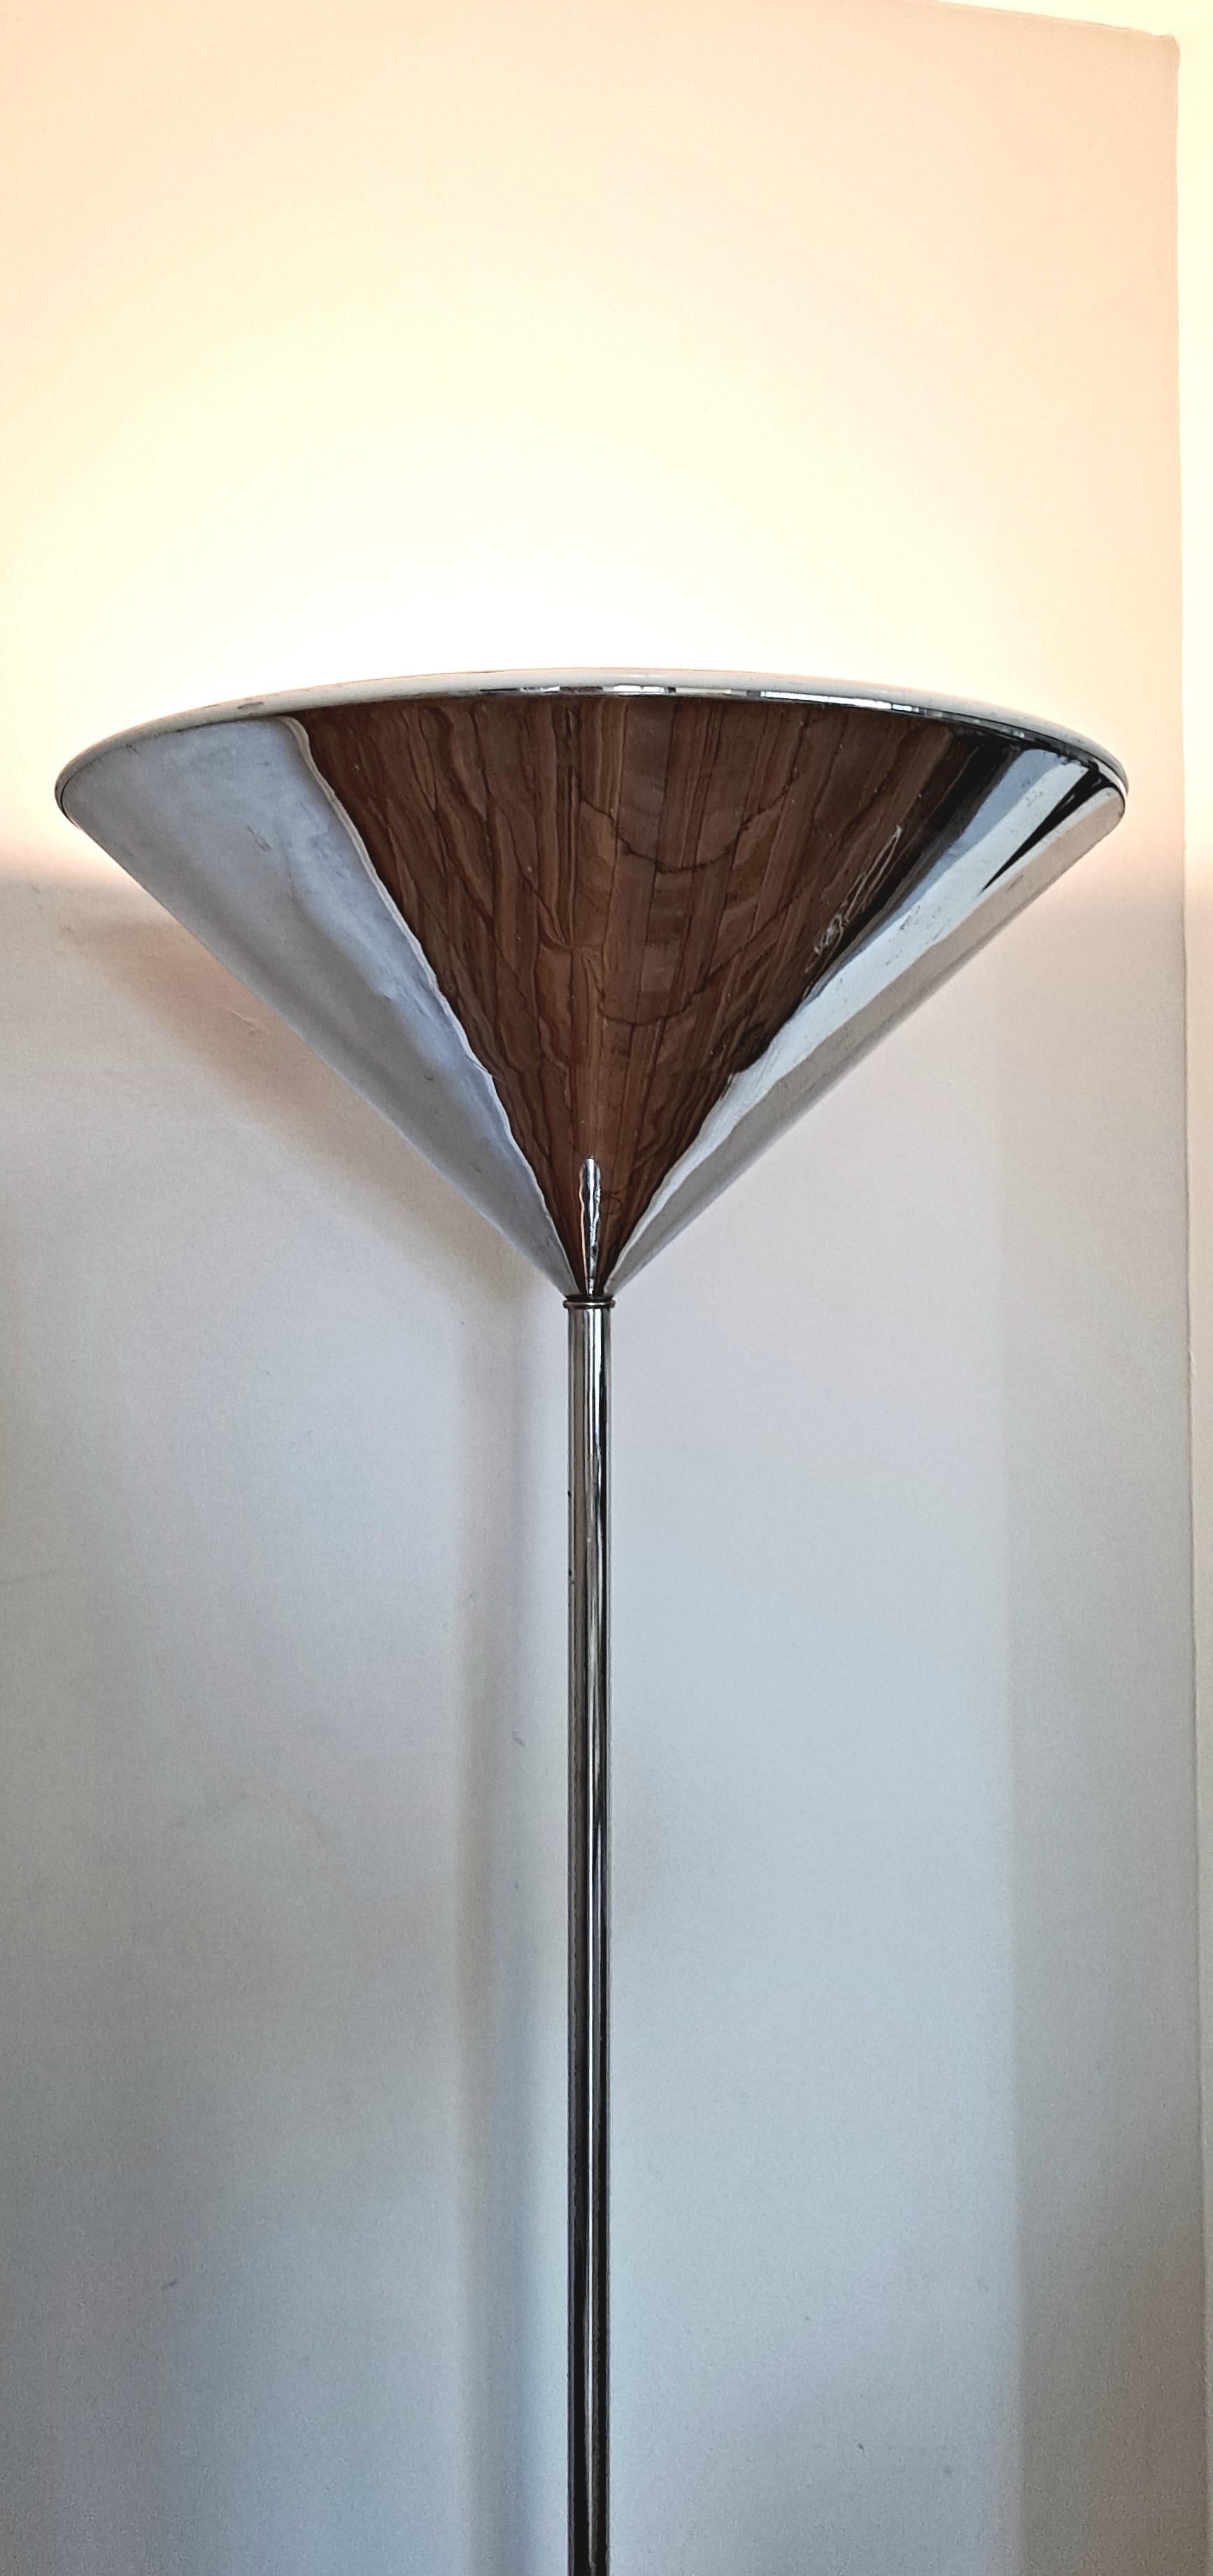 Late 20th Century Italian Mid Century  Torchiere Chrome Floor Lamp  For Sale